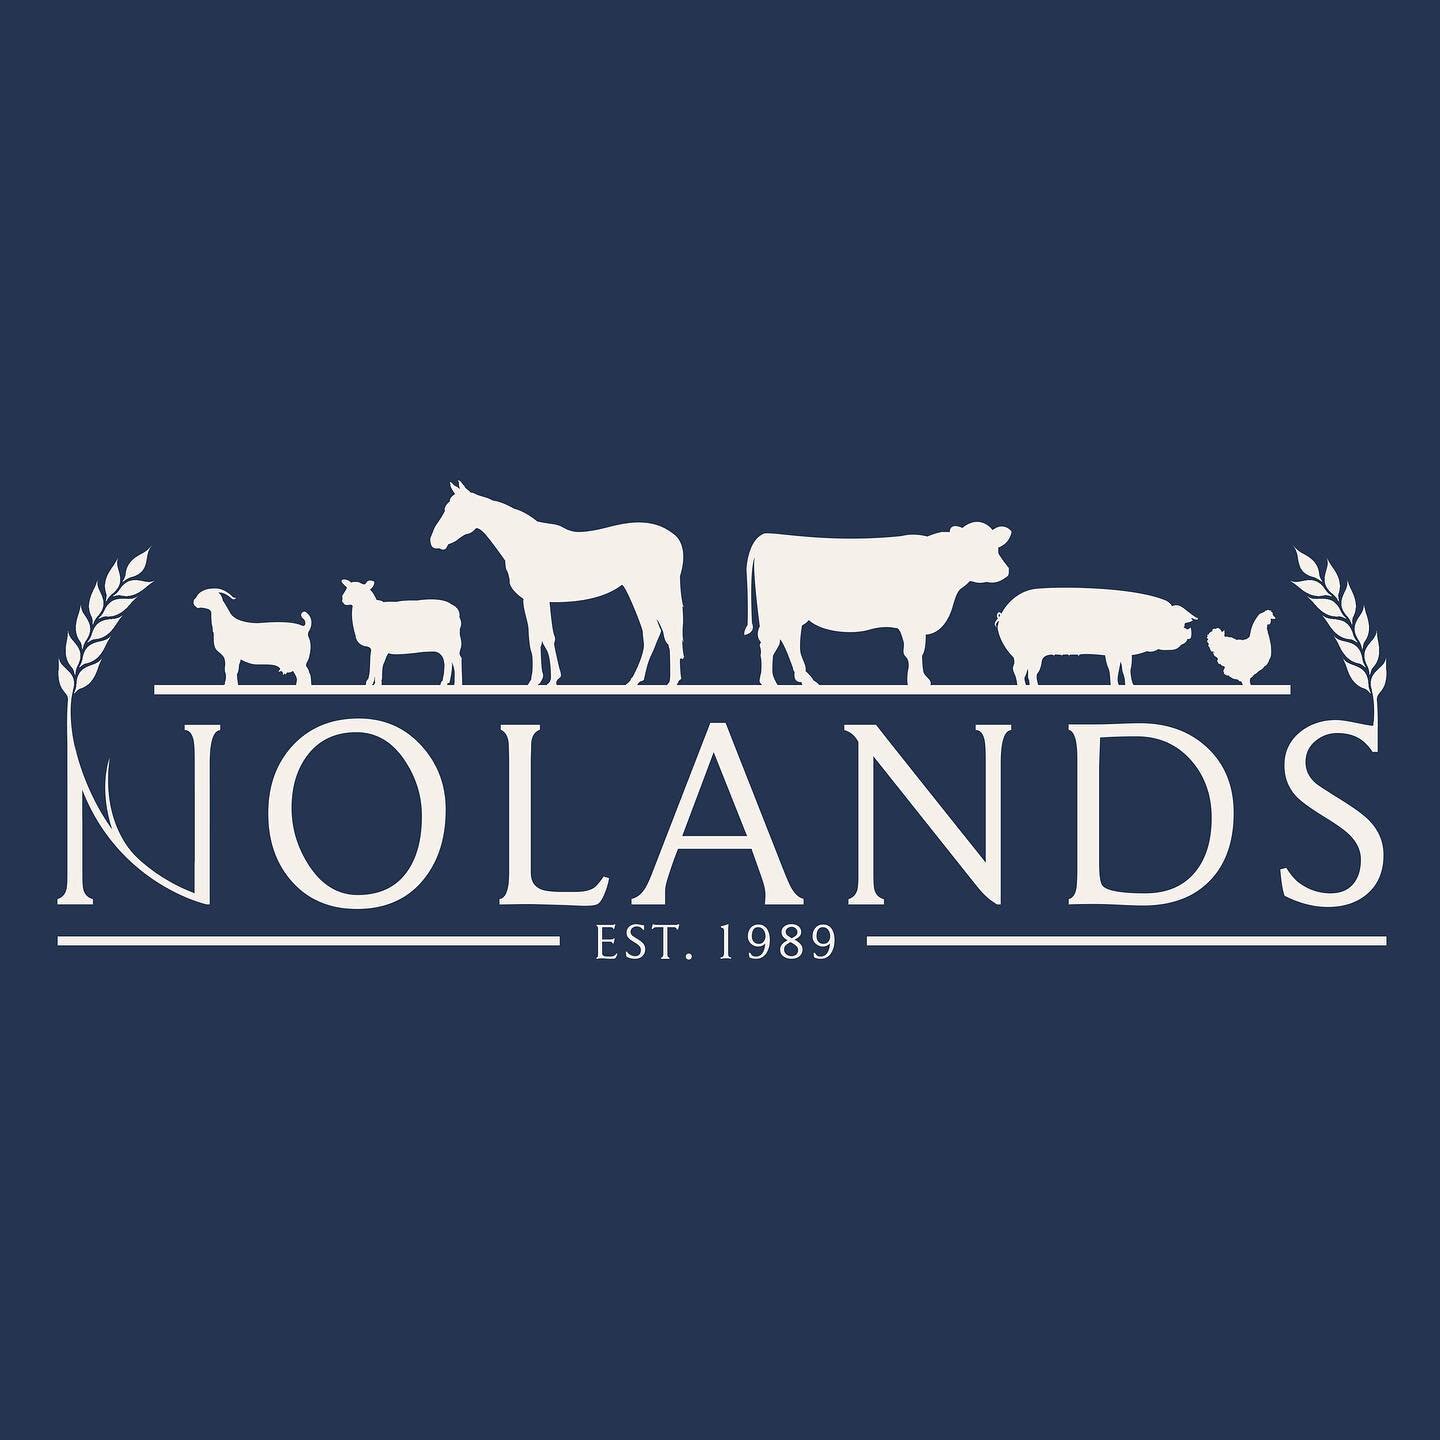 🚜🐮🐷🐓NOLANDS 🌾🐎🏖️🏡

Welcome to Nolands, we&rsquo;d like to introduce you to our new logo &amp; our new website!

We are a family business run by husband &amp; wife team, Steve &amp; Sue Wilkins, &amp; their two children, Mike &amp; Chloe.

Nol